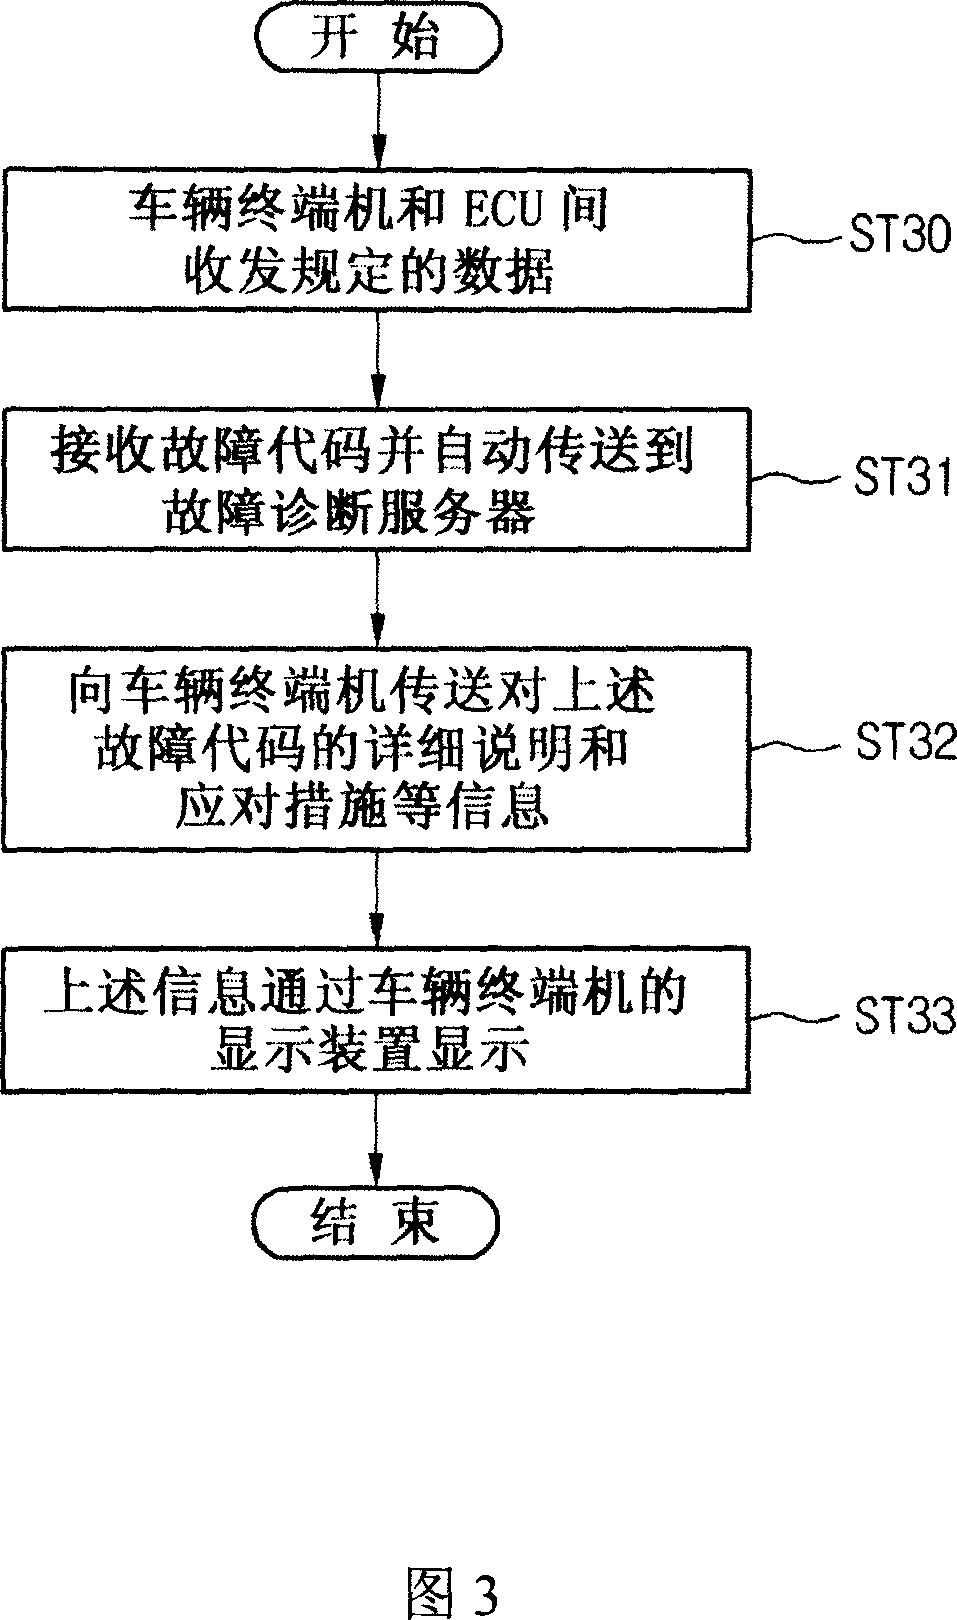 System and method for diagnosing automobile by wireless telecommunication network